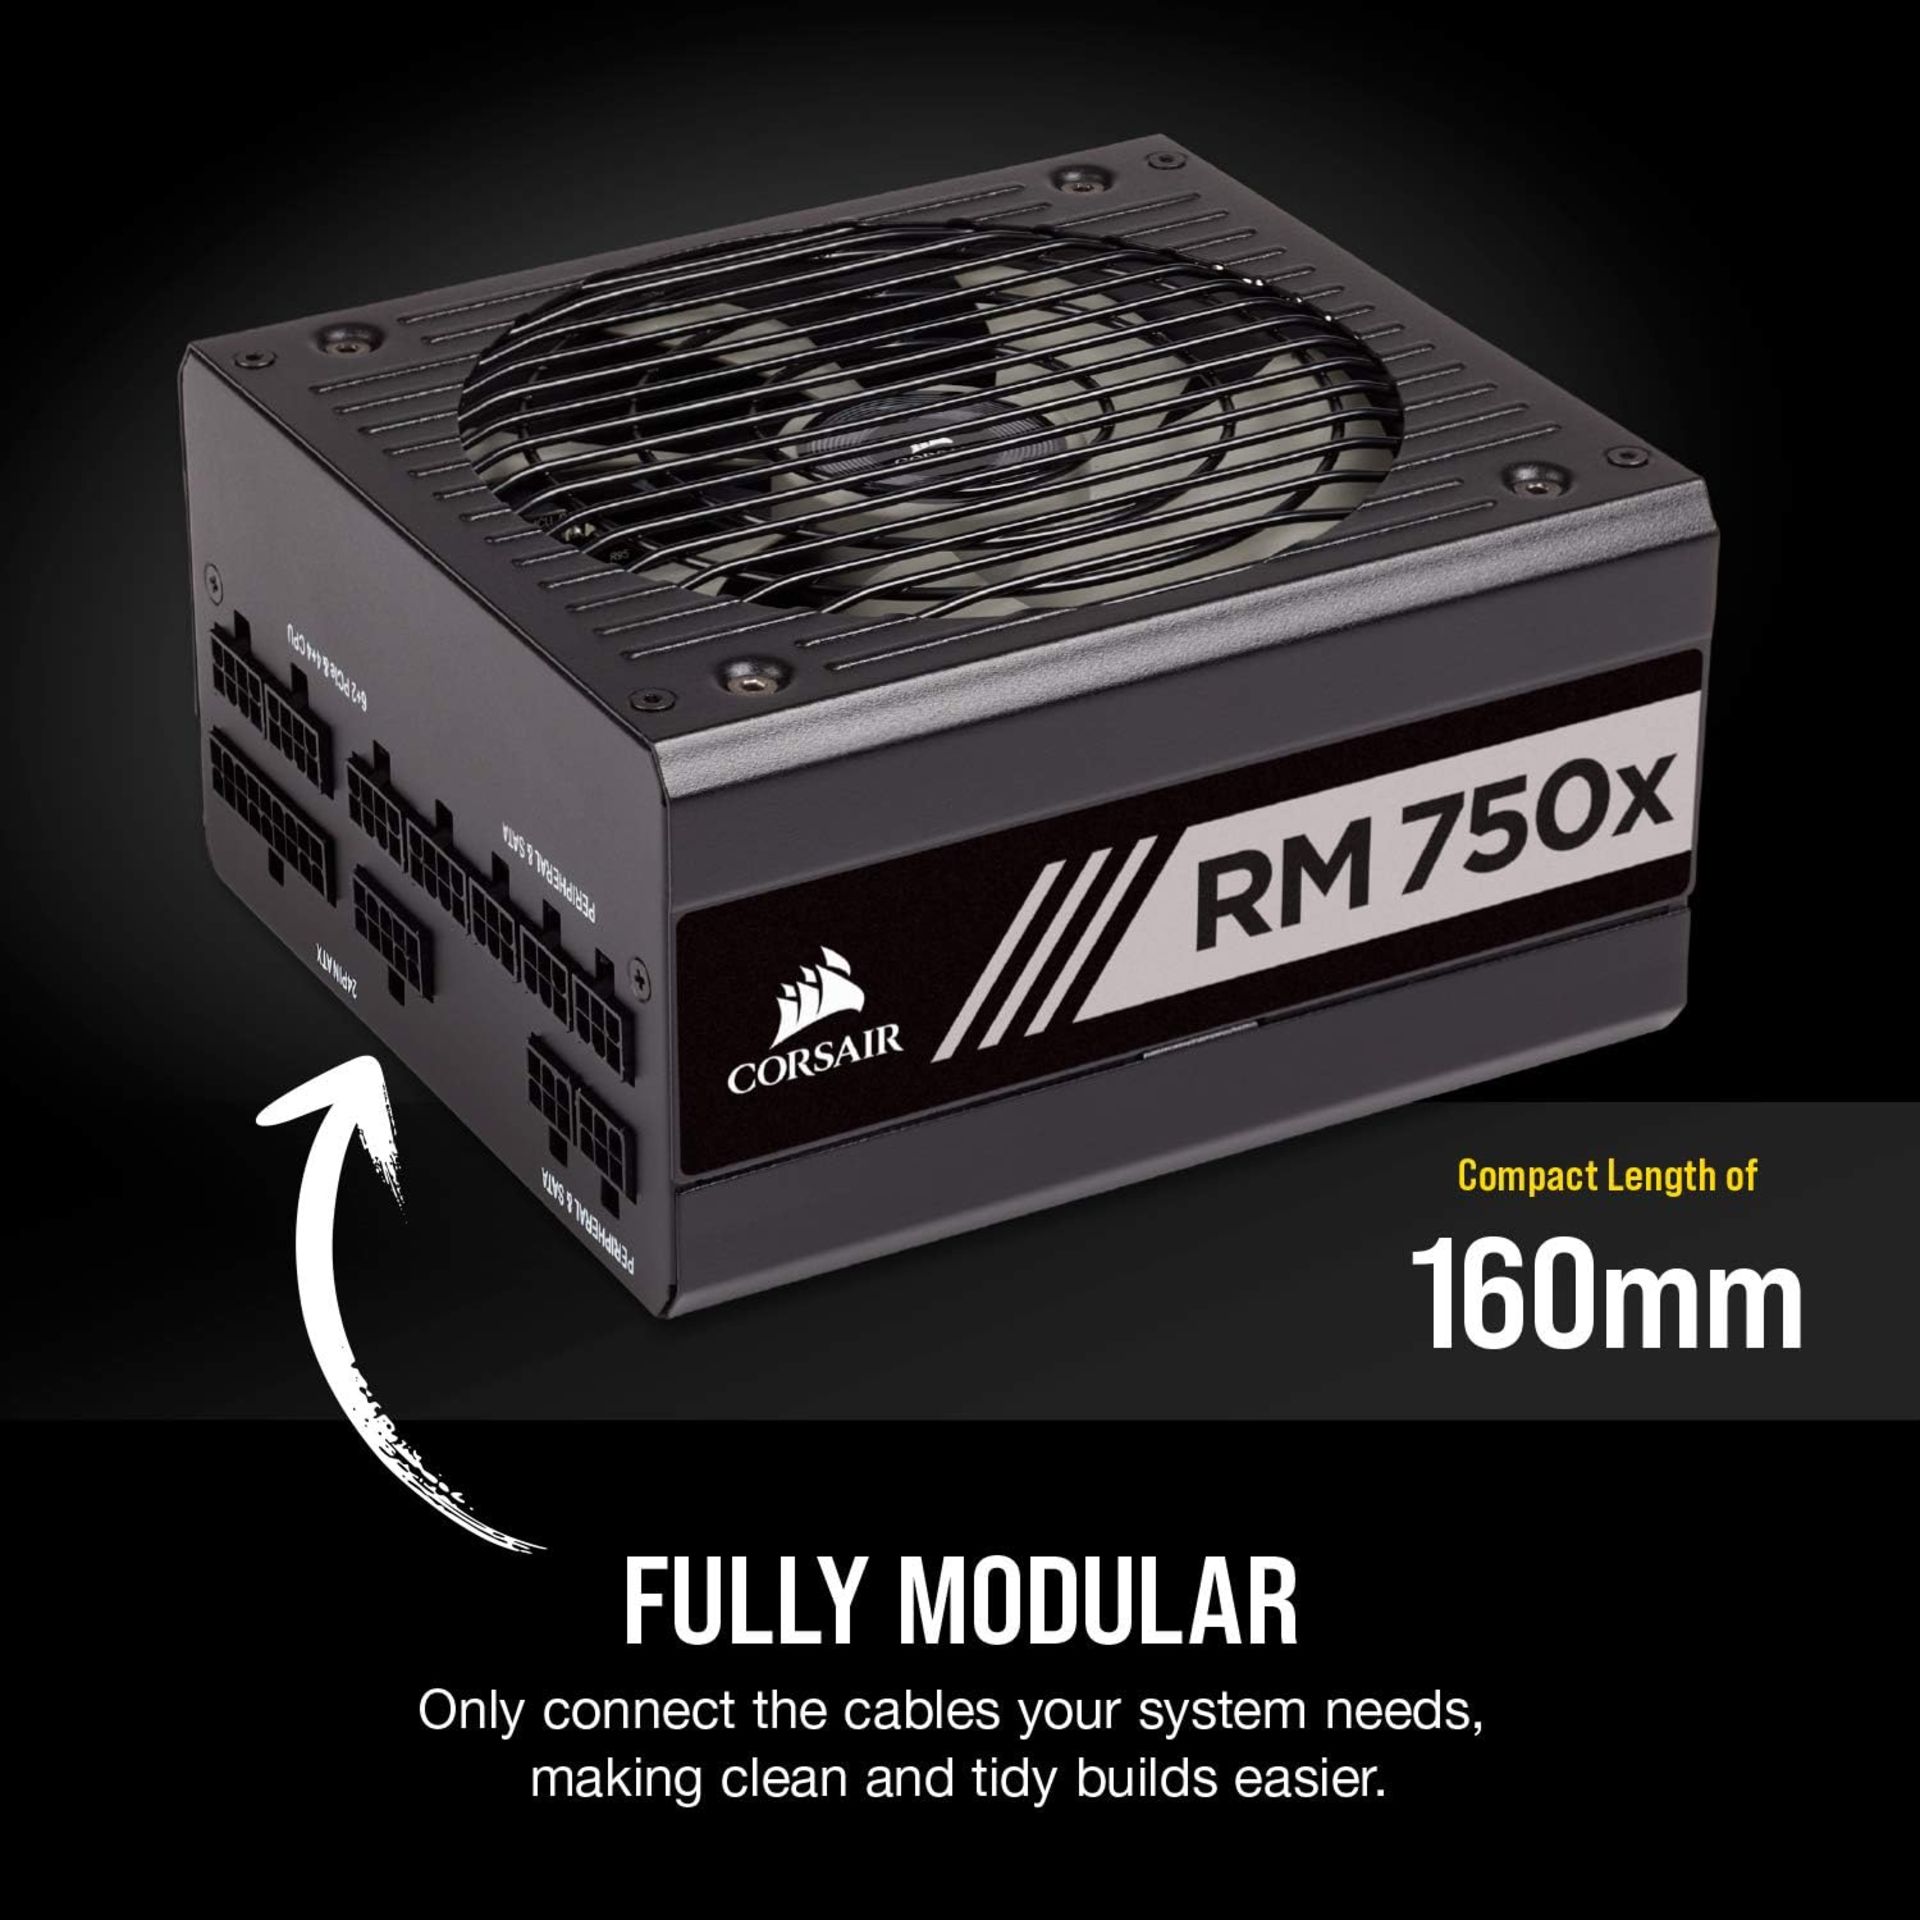 BRAND NEW FACTORY SEALED CORSAIR RM750x 80 PLUS Gold 750 W Fully Modular ATX Power Supply Unit. - Image 5 of 10